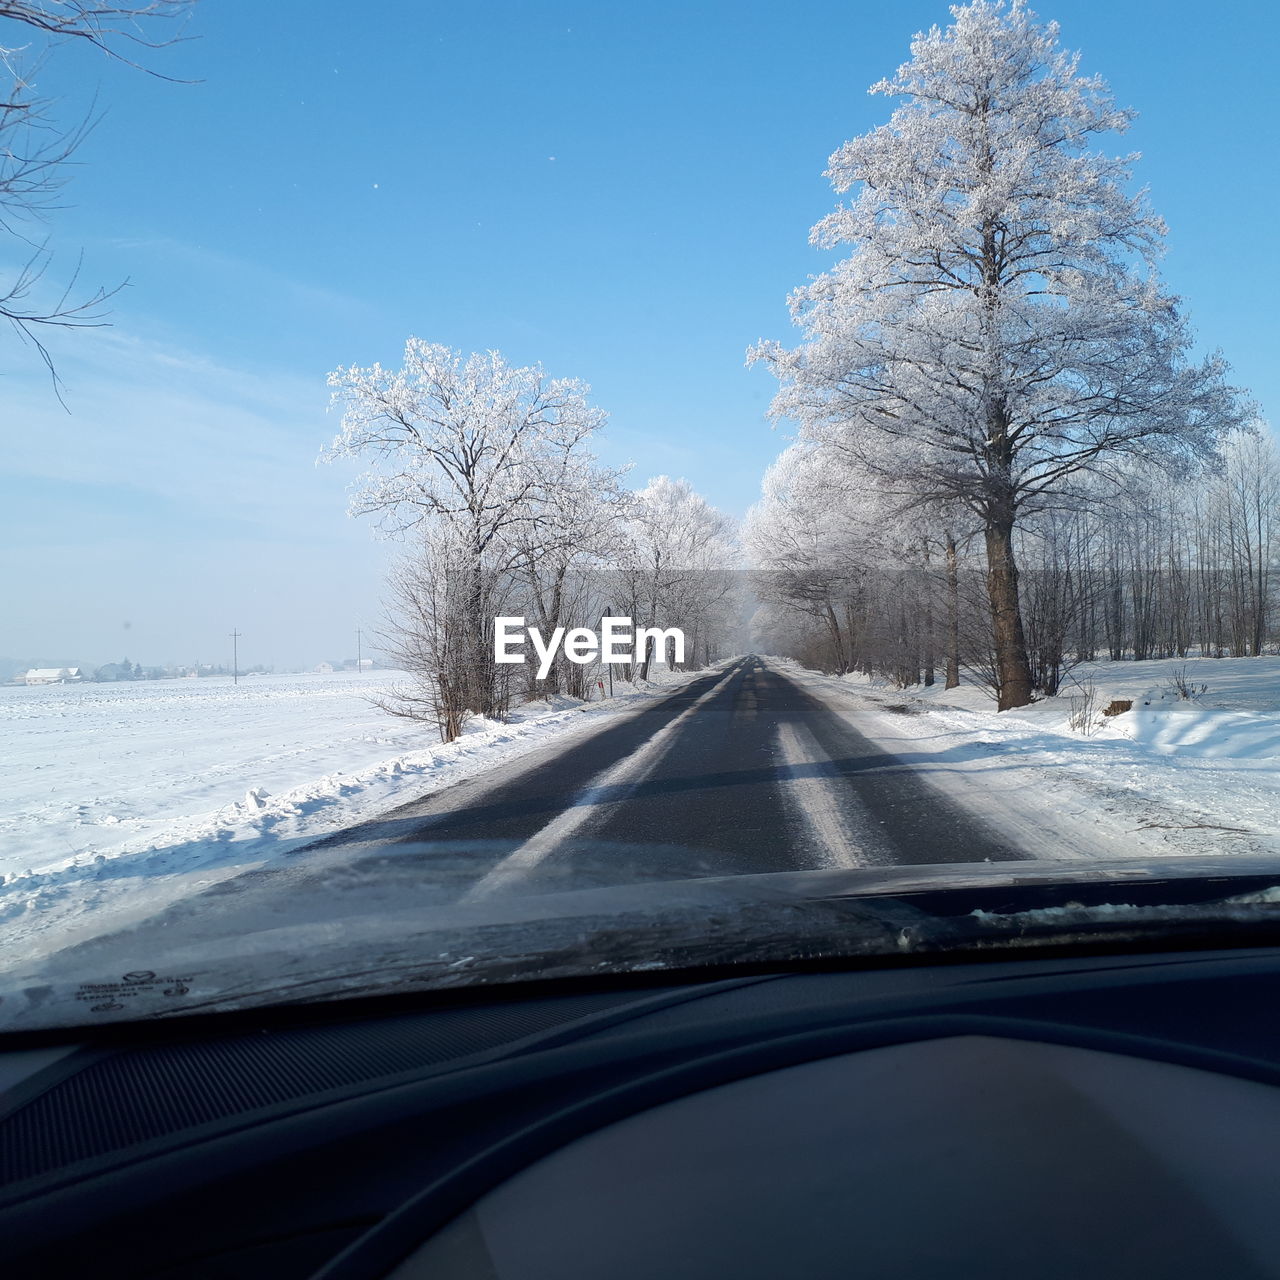 Snow covered road seen through car windshield